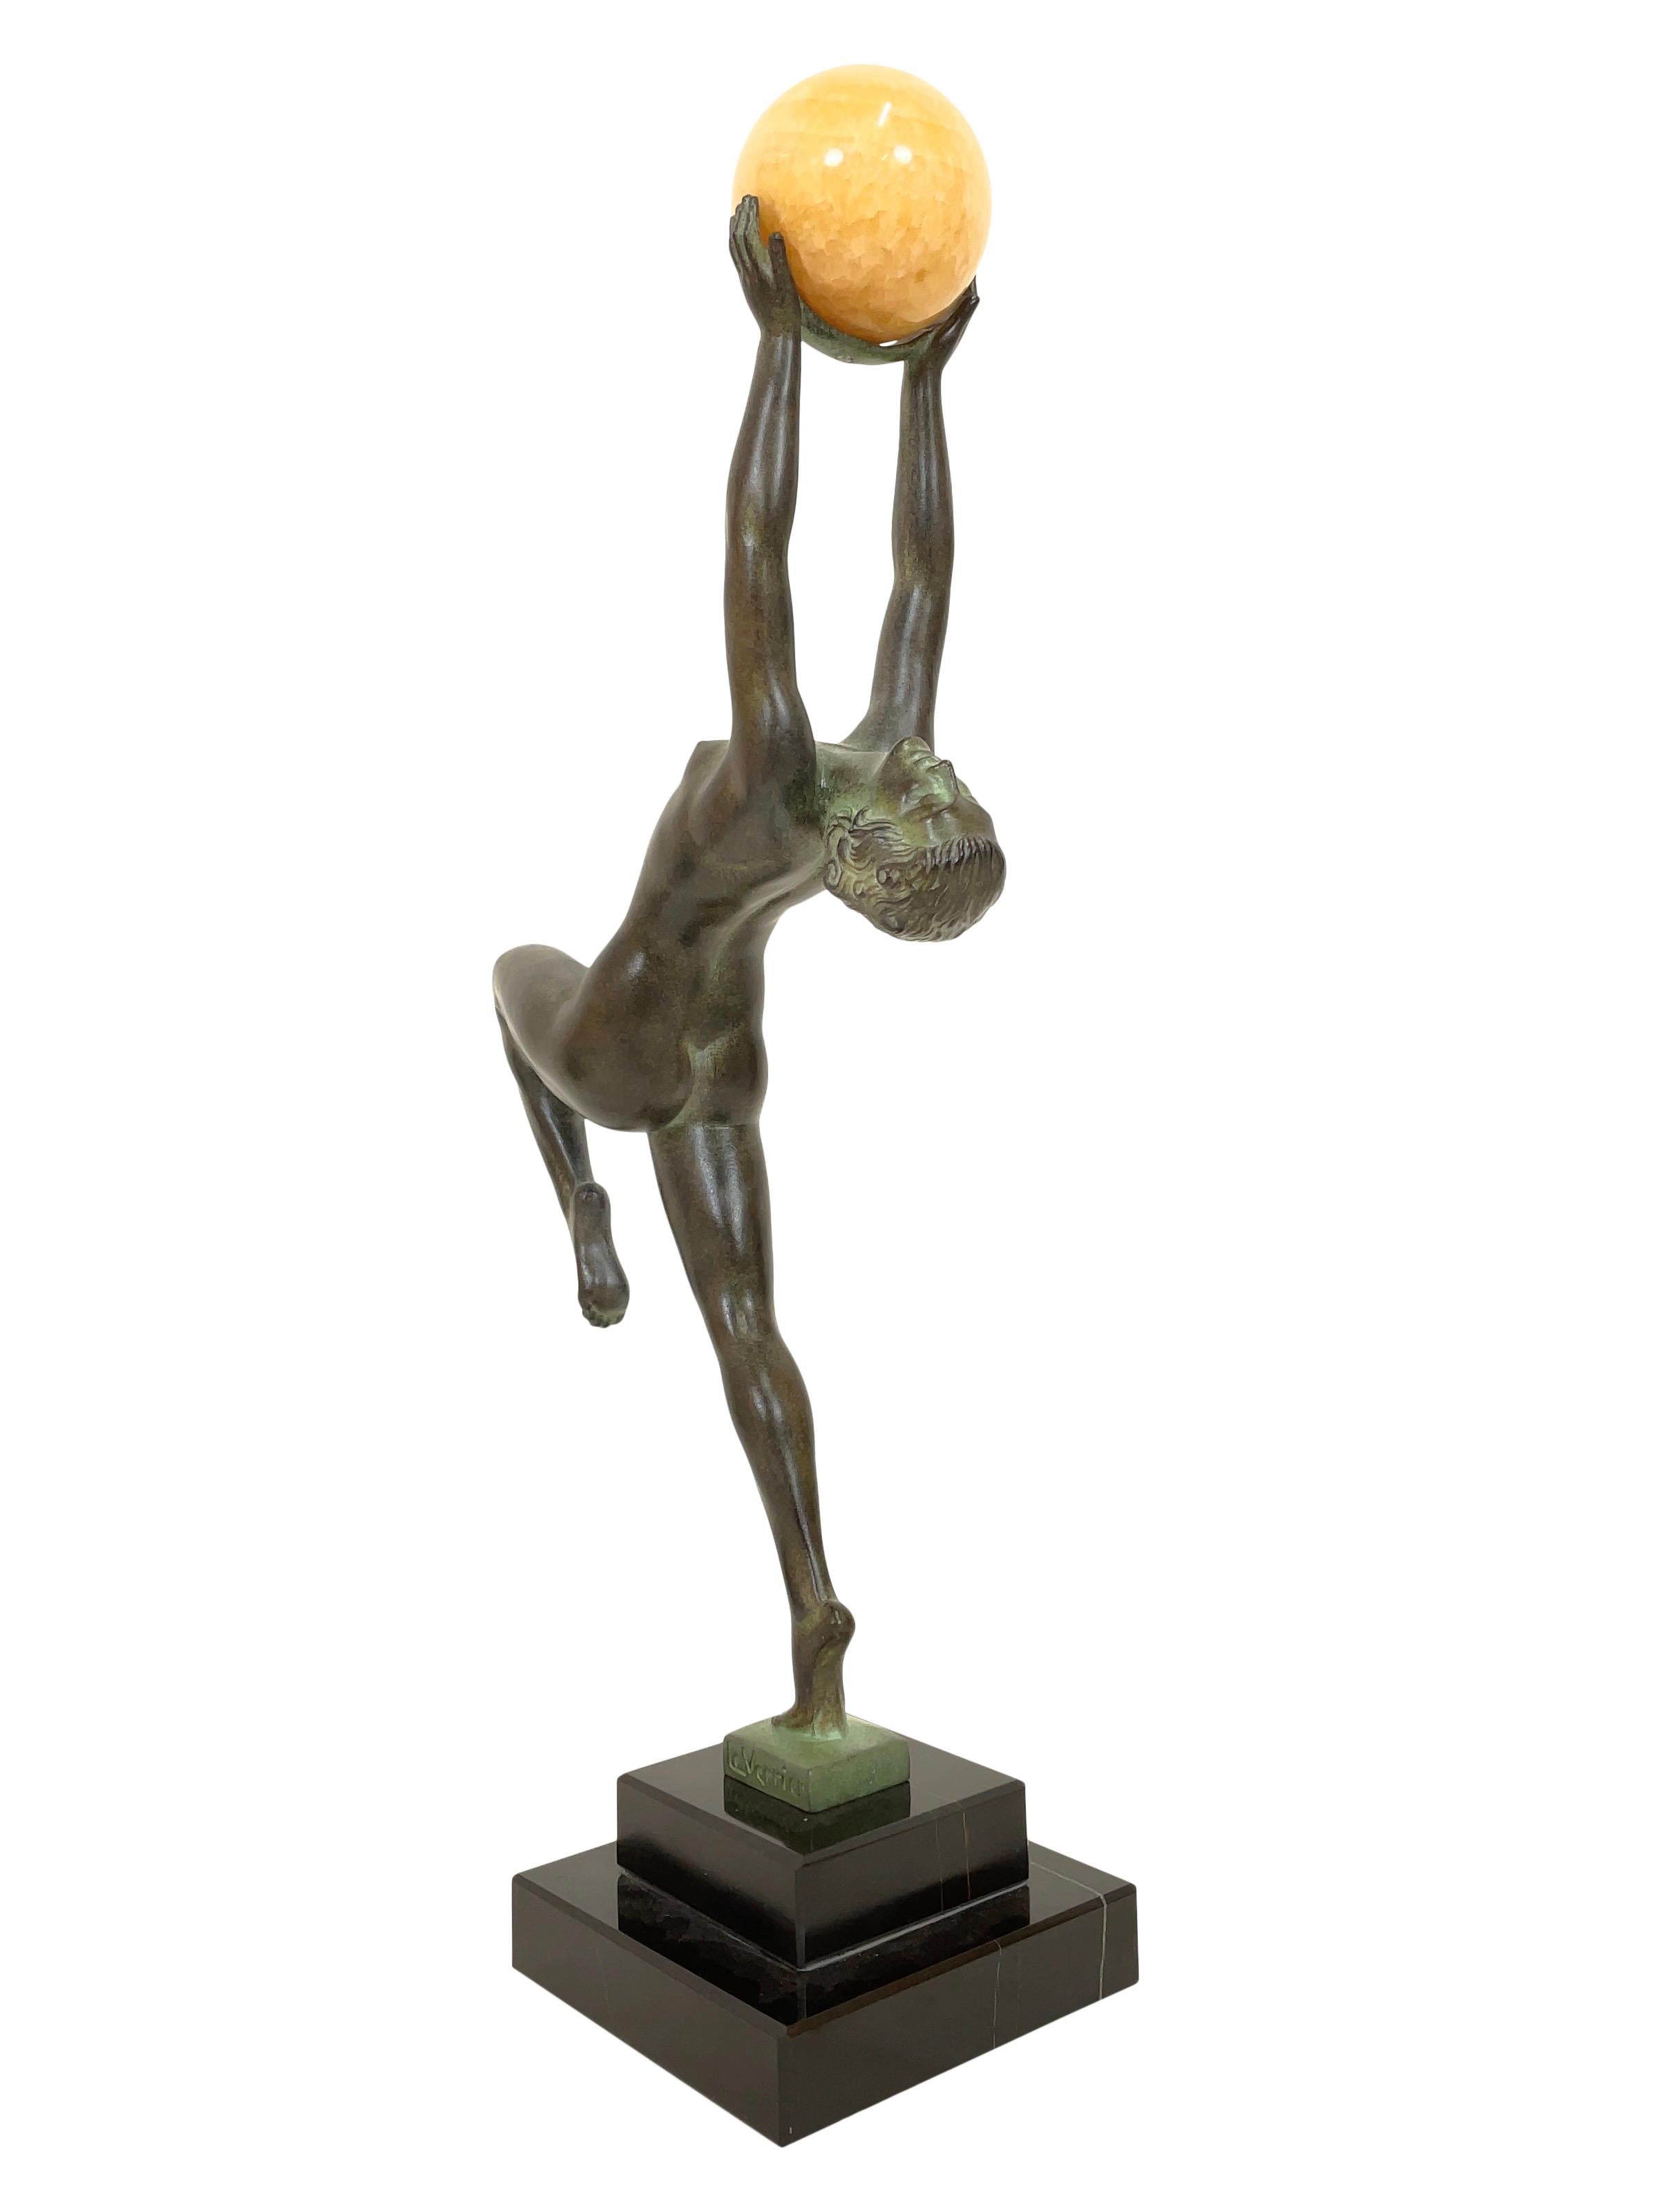 Patinated Dancer Sculpture Jeu with a Jade Ball from Max Le Verrier in Art Deco Style